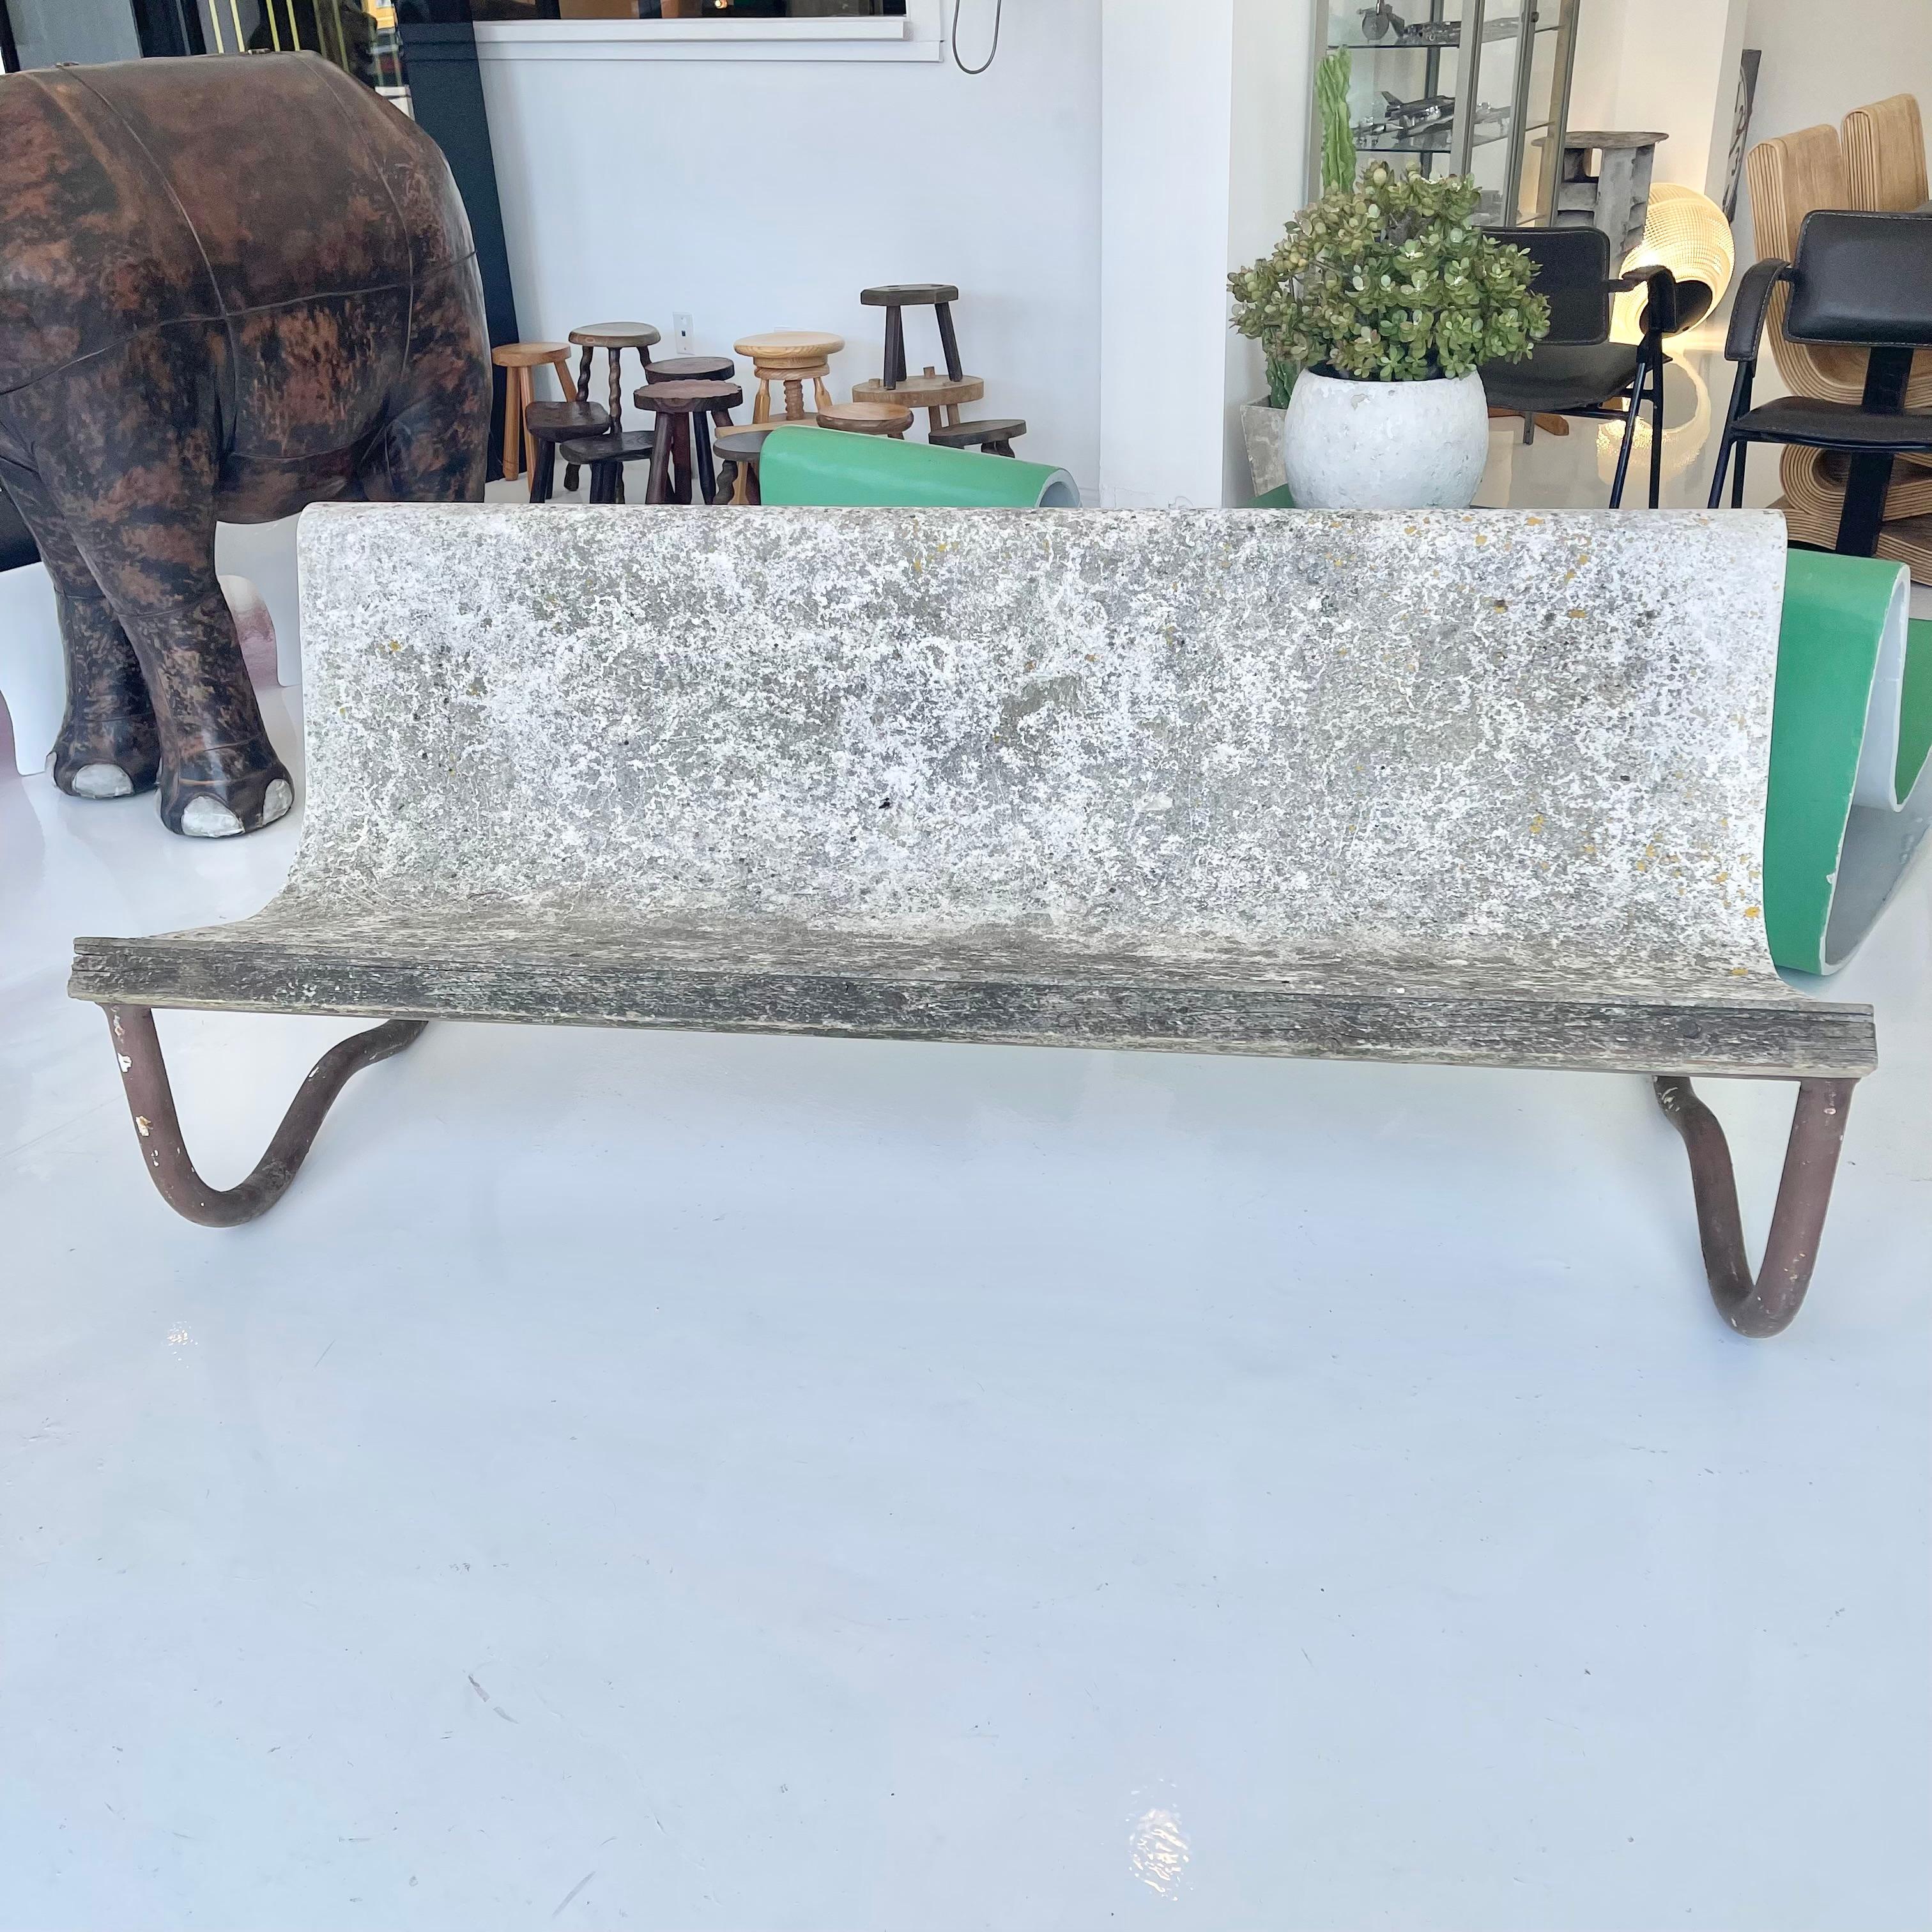 Remarkable mid-century floating concrete bench by Swiss Architect Willy Guhl. Circa 1960s. Sturdy and substantial. Holds the weight of 3 adults easily. Perfect minimal design as is common with the Swiss designer. The seat is made of fiber cement